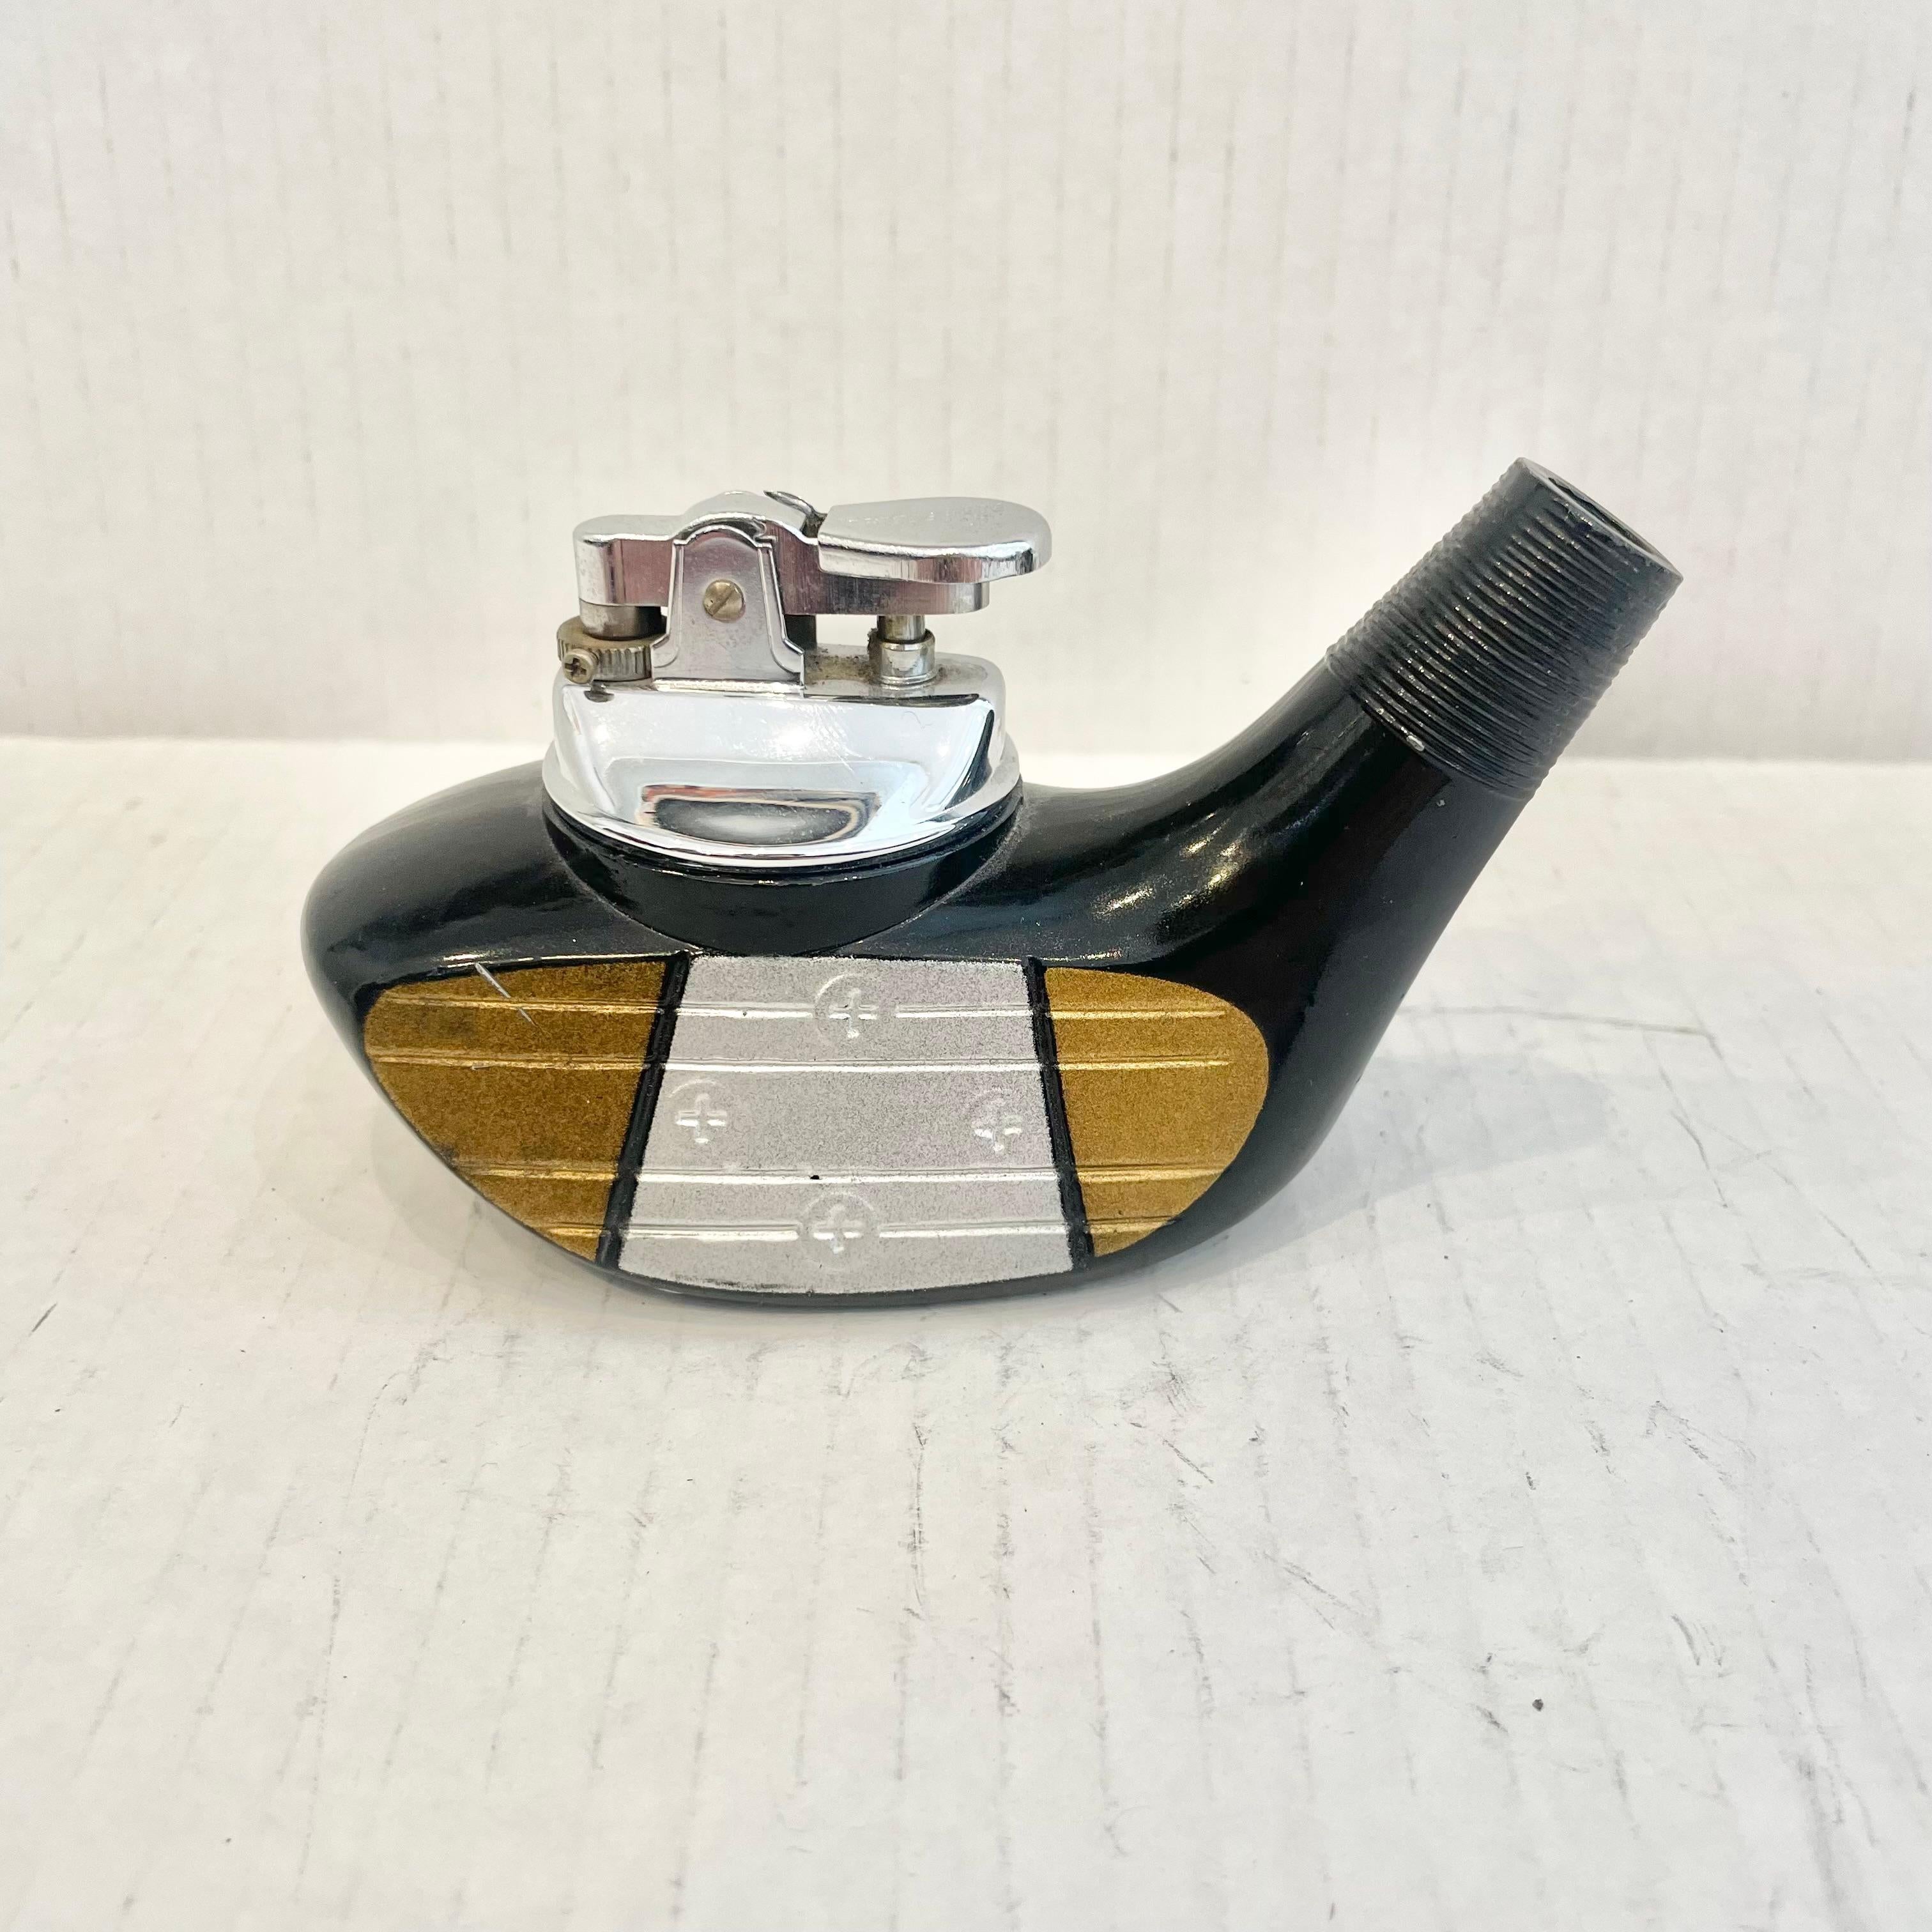 Cool vintage table lighter in the shape of a golf club driving head. Made completely of metal with a hollow body. Beautiful black body with silver and gold face plate with a grooved face. Cool tobacco accessory and conversation piece. Working